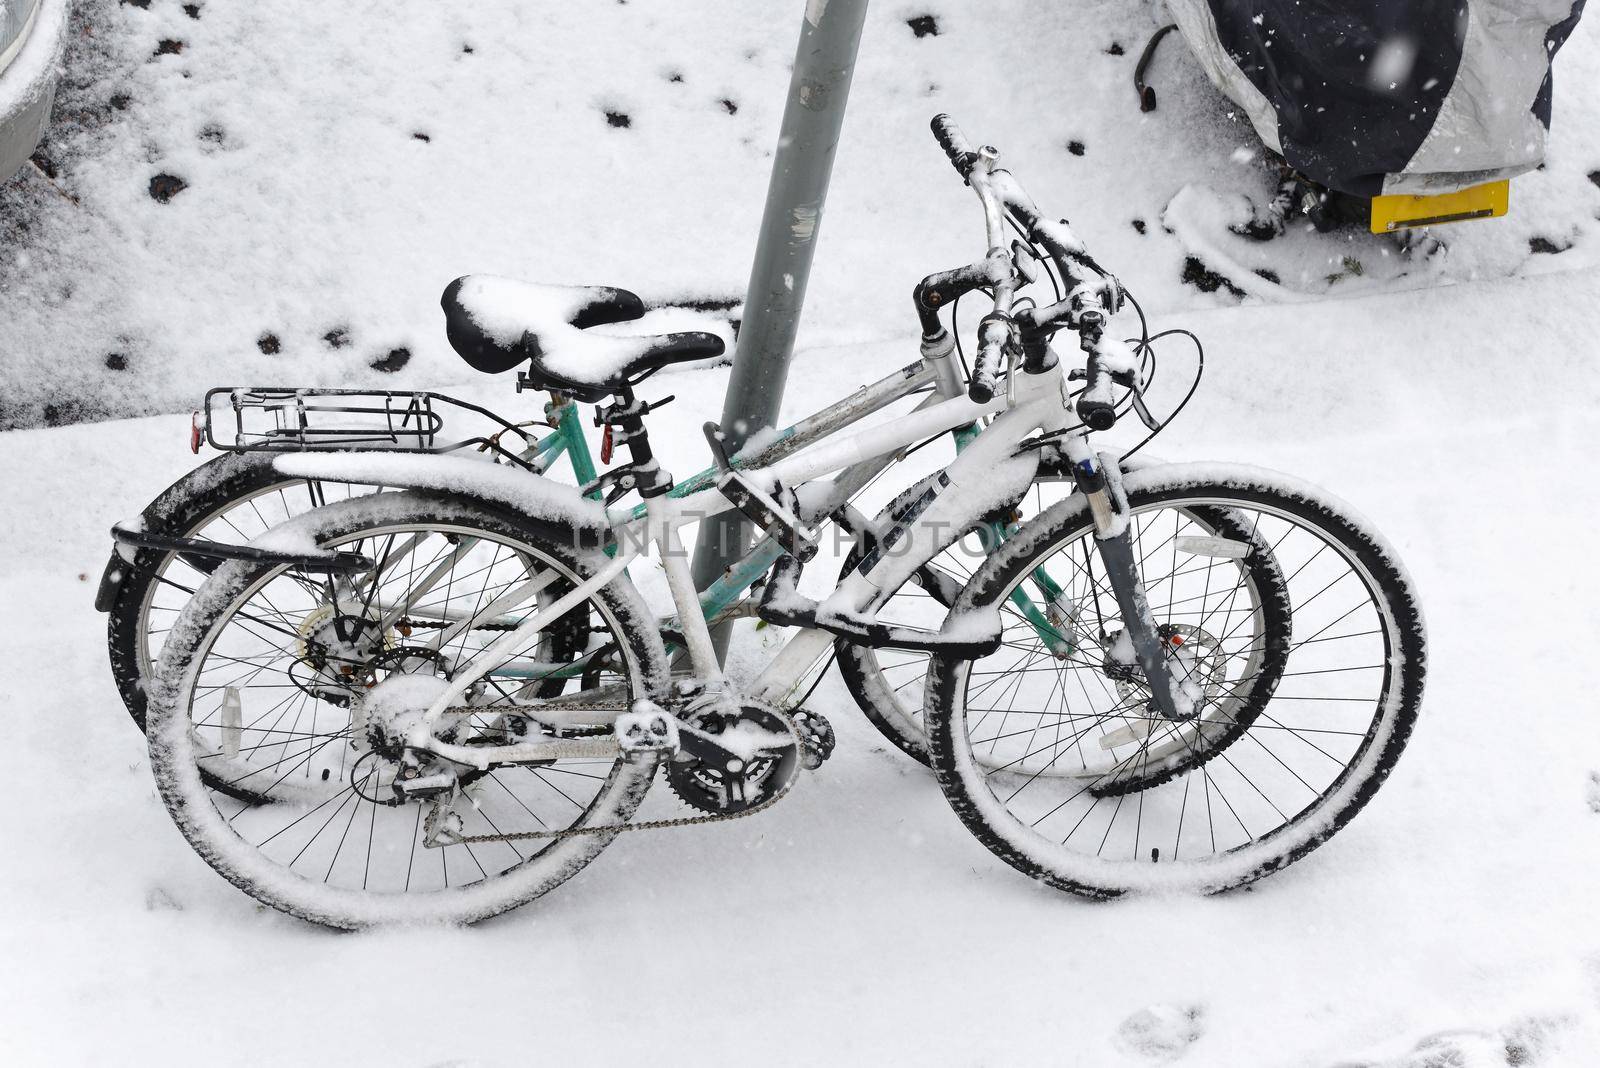 Two locked bicycles covered in snow, winter season